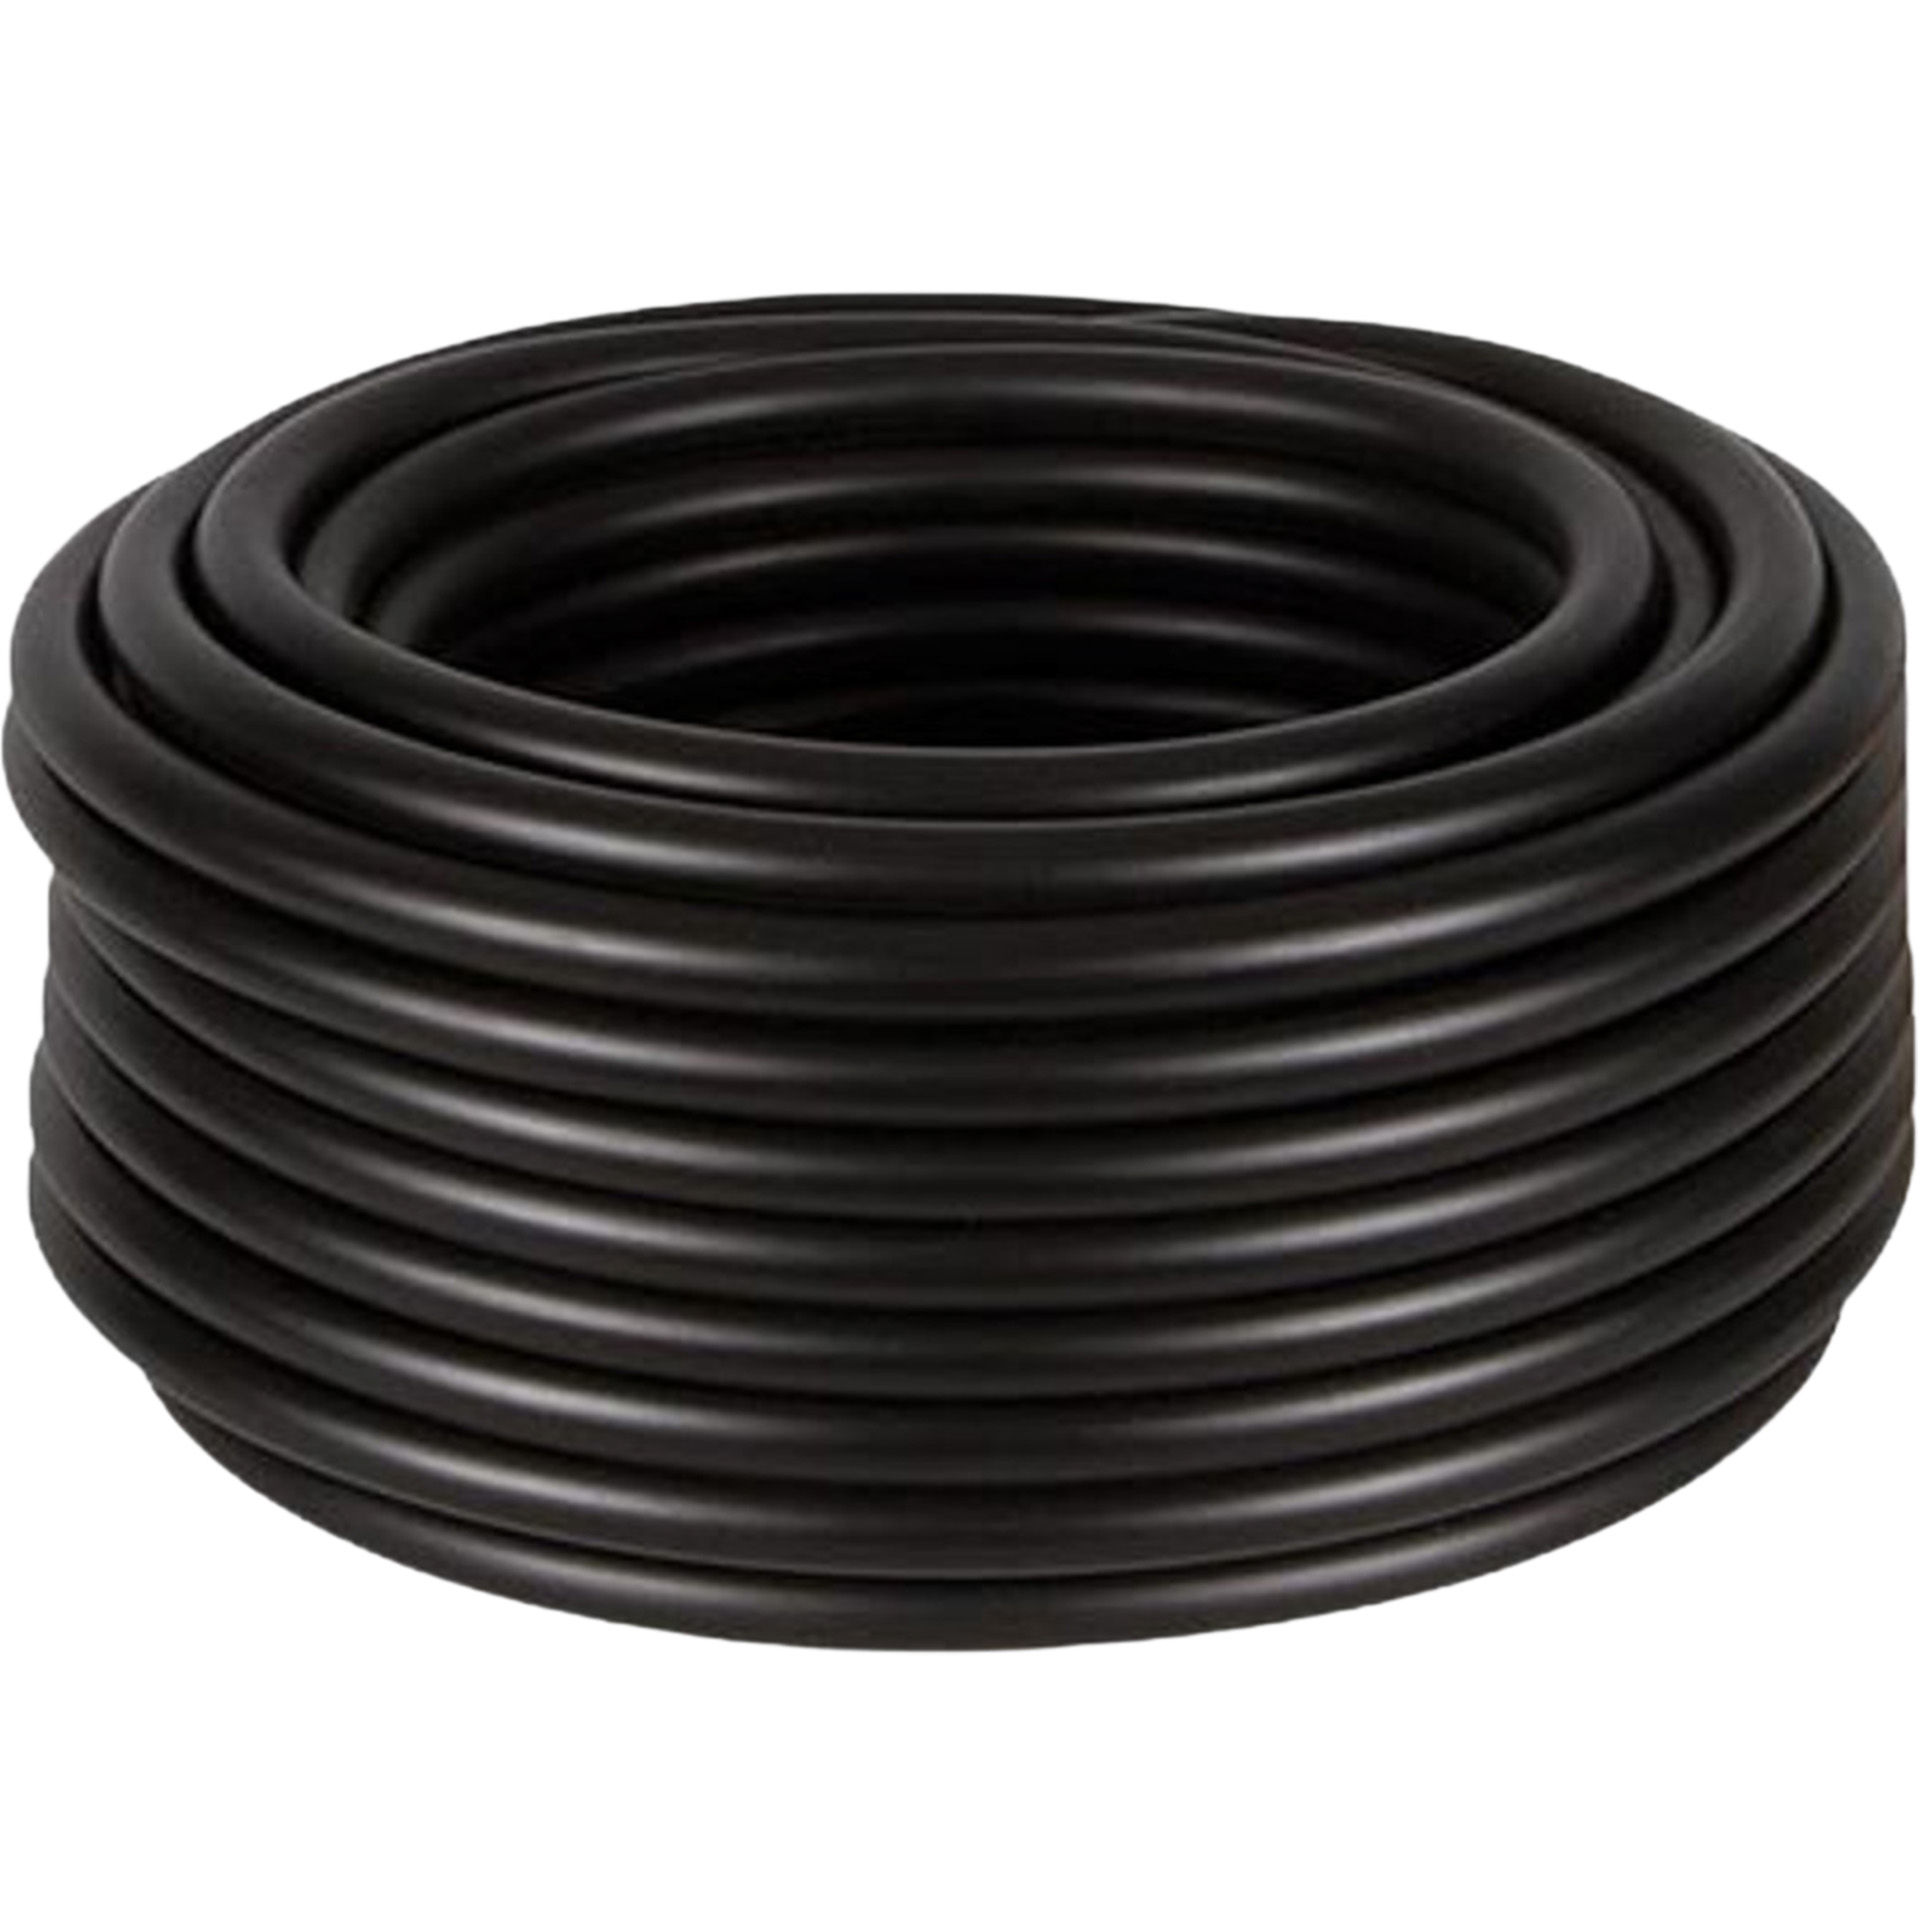 Pond Pro 1/2" Sinking Airline tubing